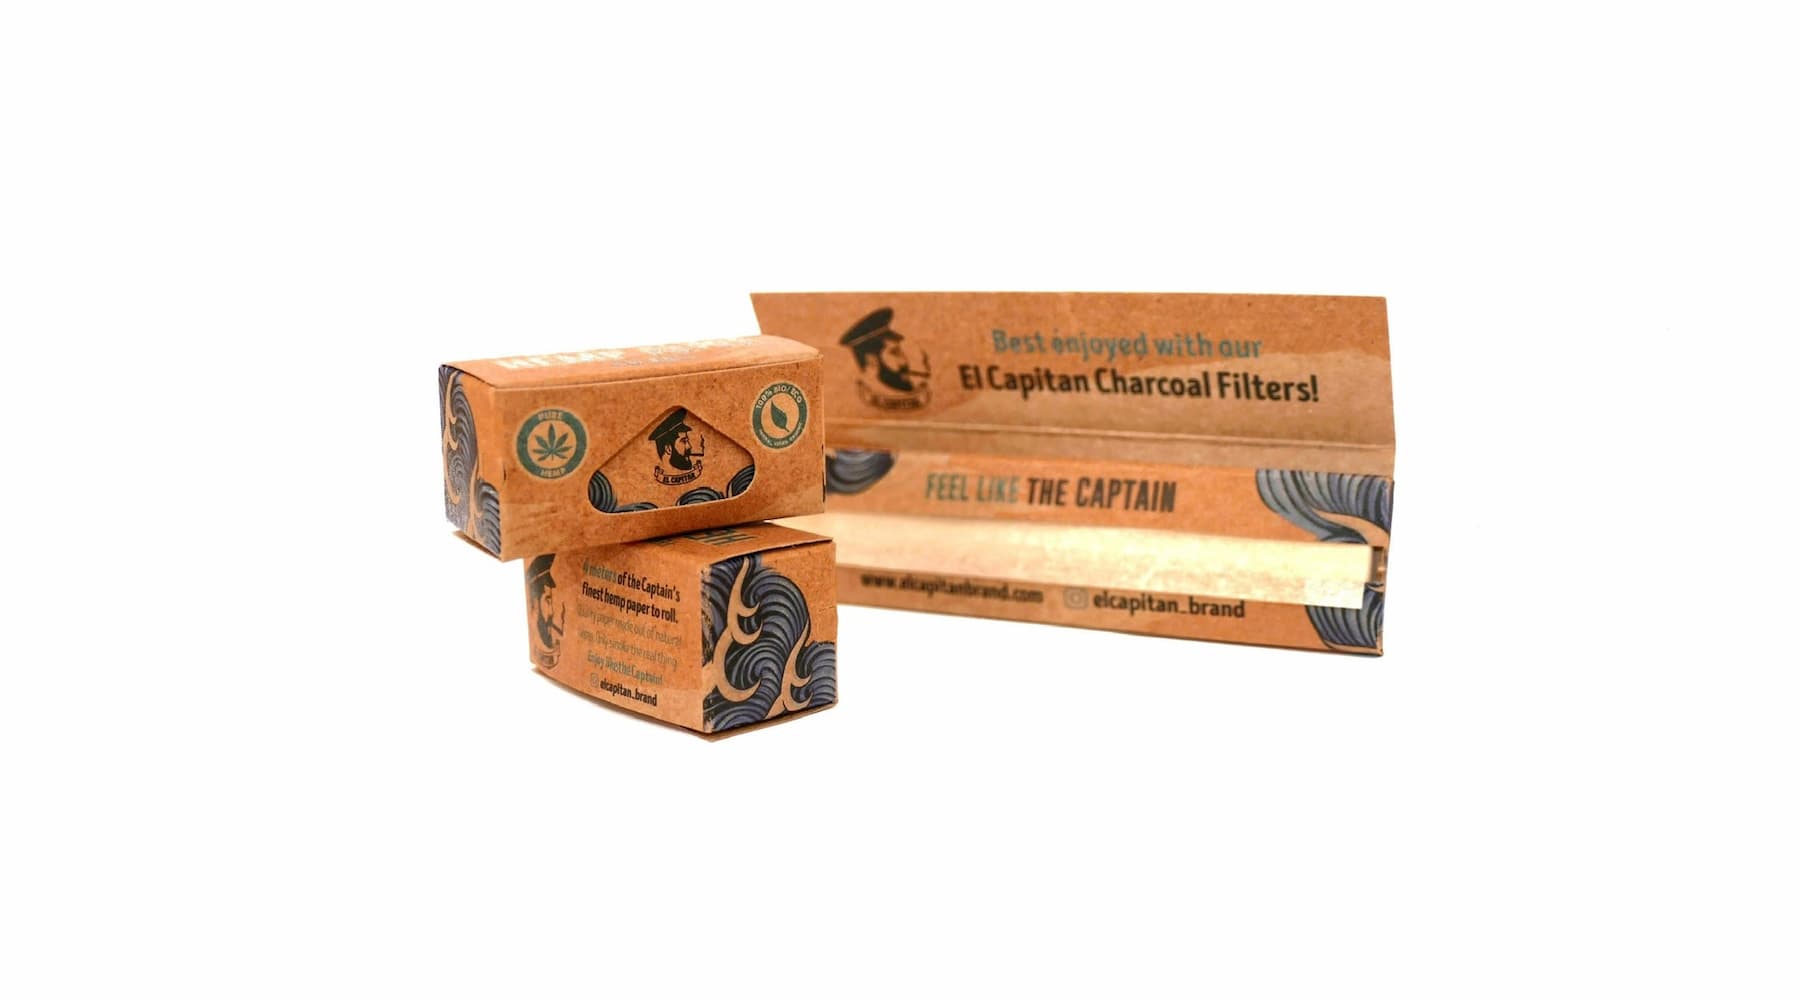 el Capitan new Papes Hemp out Recycled Biodegradable 